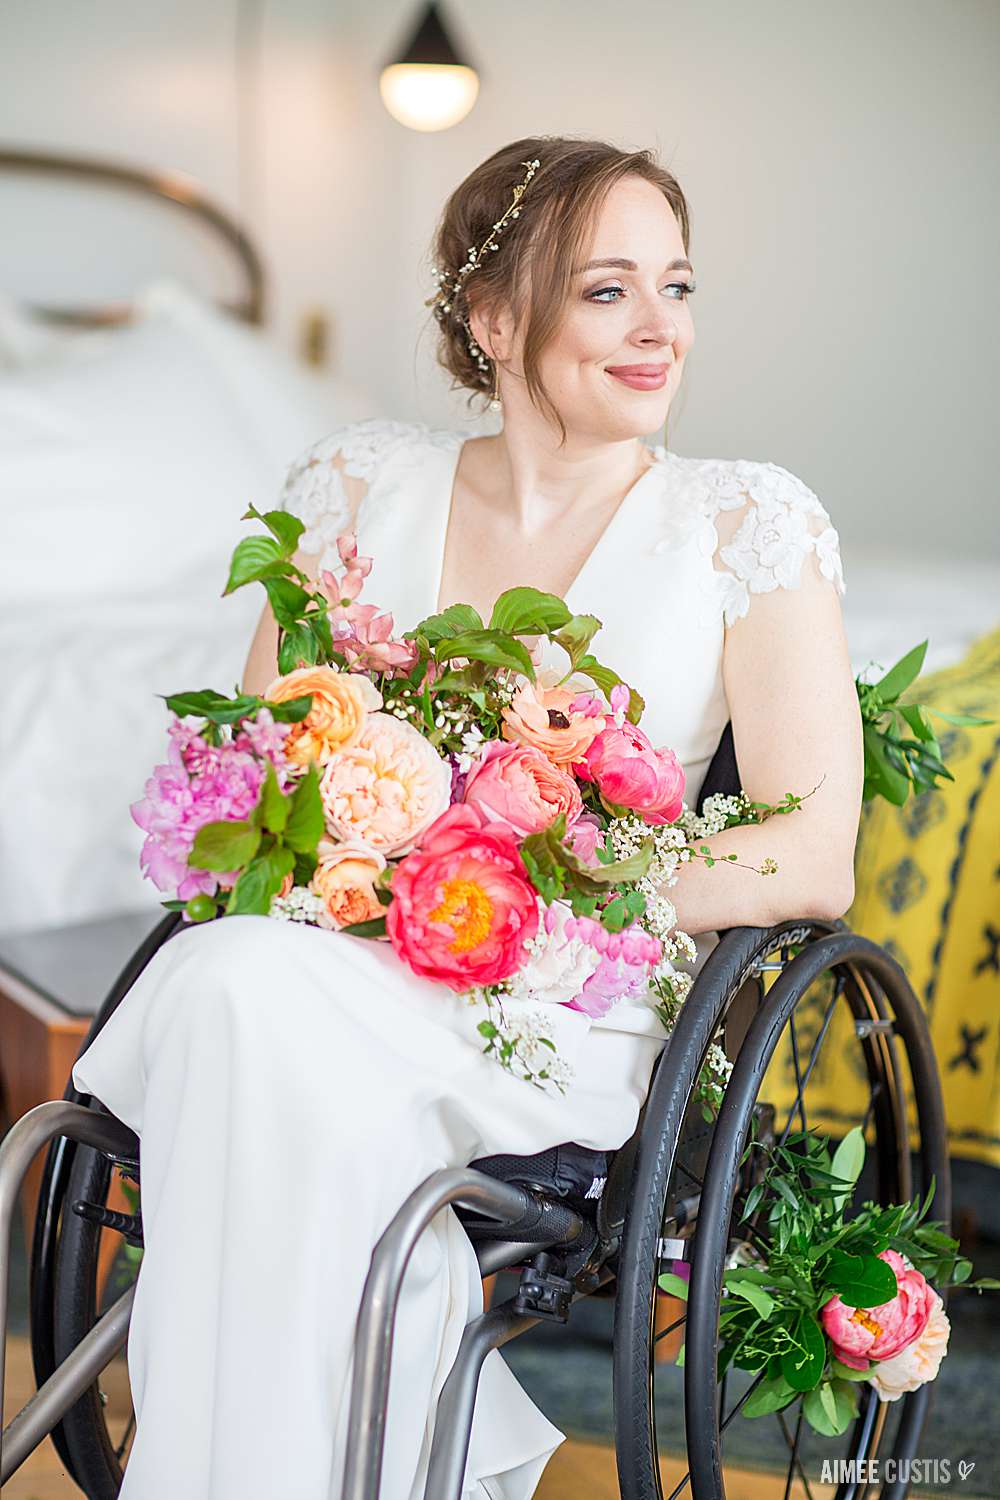 Beth sitting in her wheelchair wearing a wedding dress and holding a large bouquet of flowers.